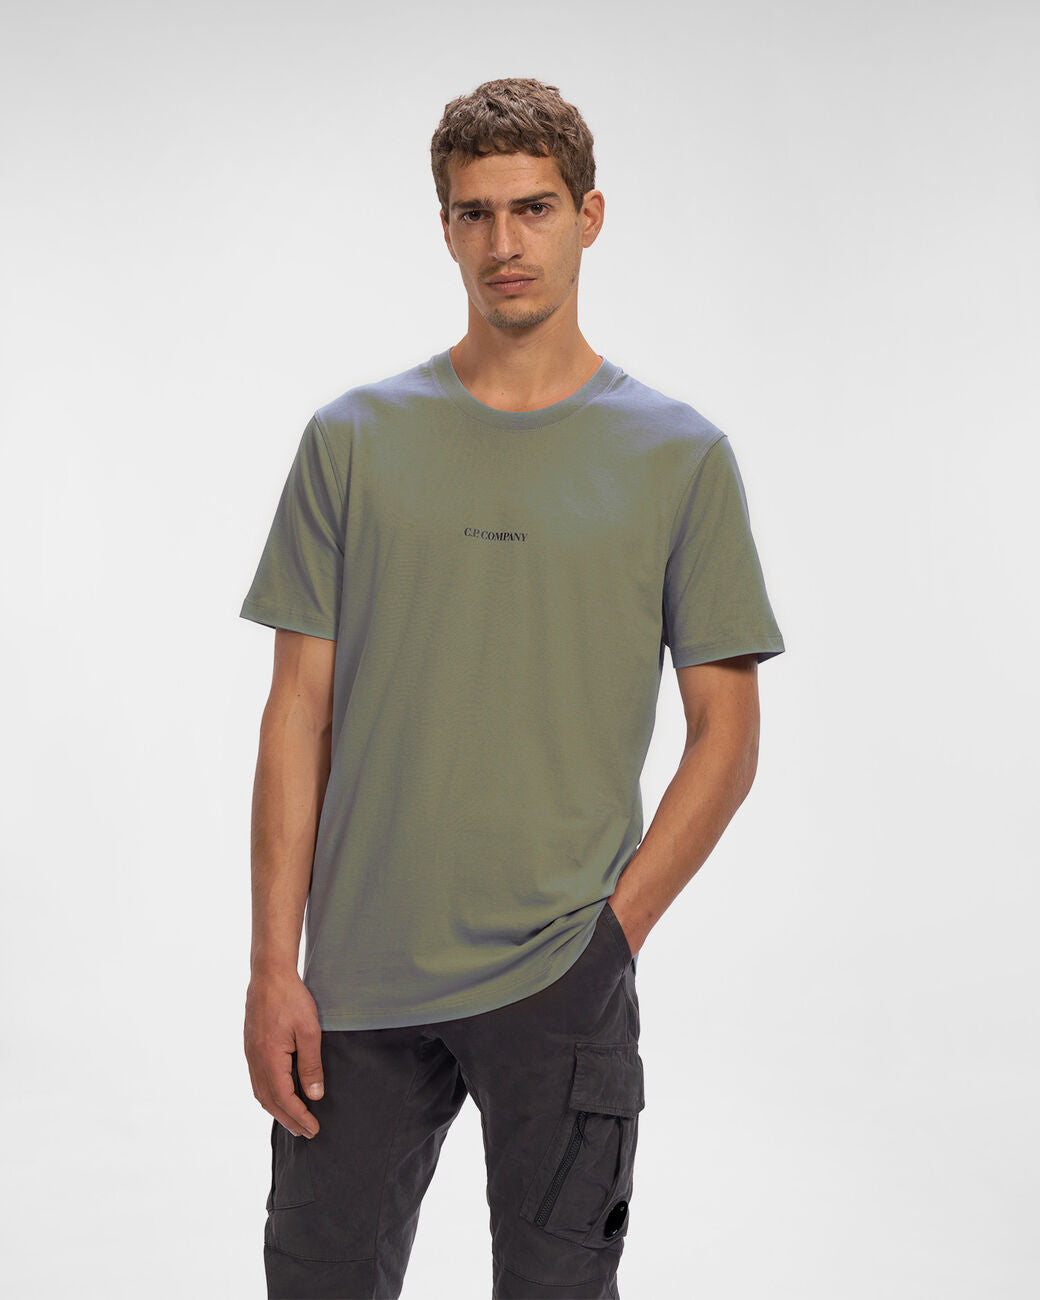 C.P COMPANY T-Shirt in military green